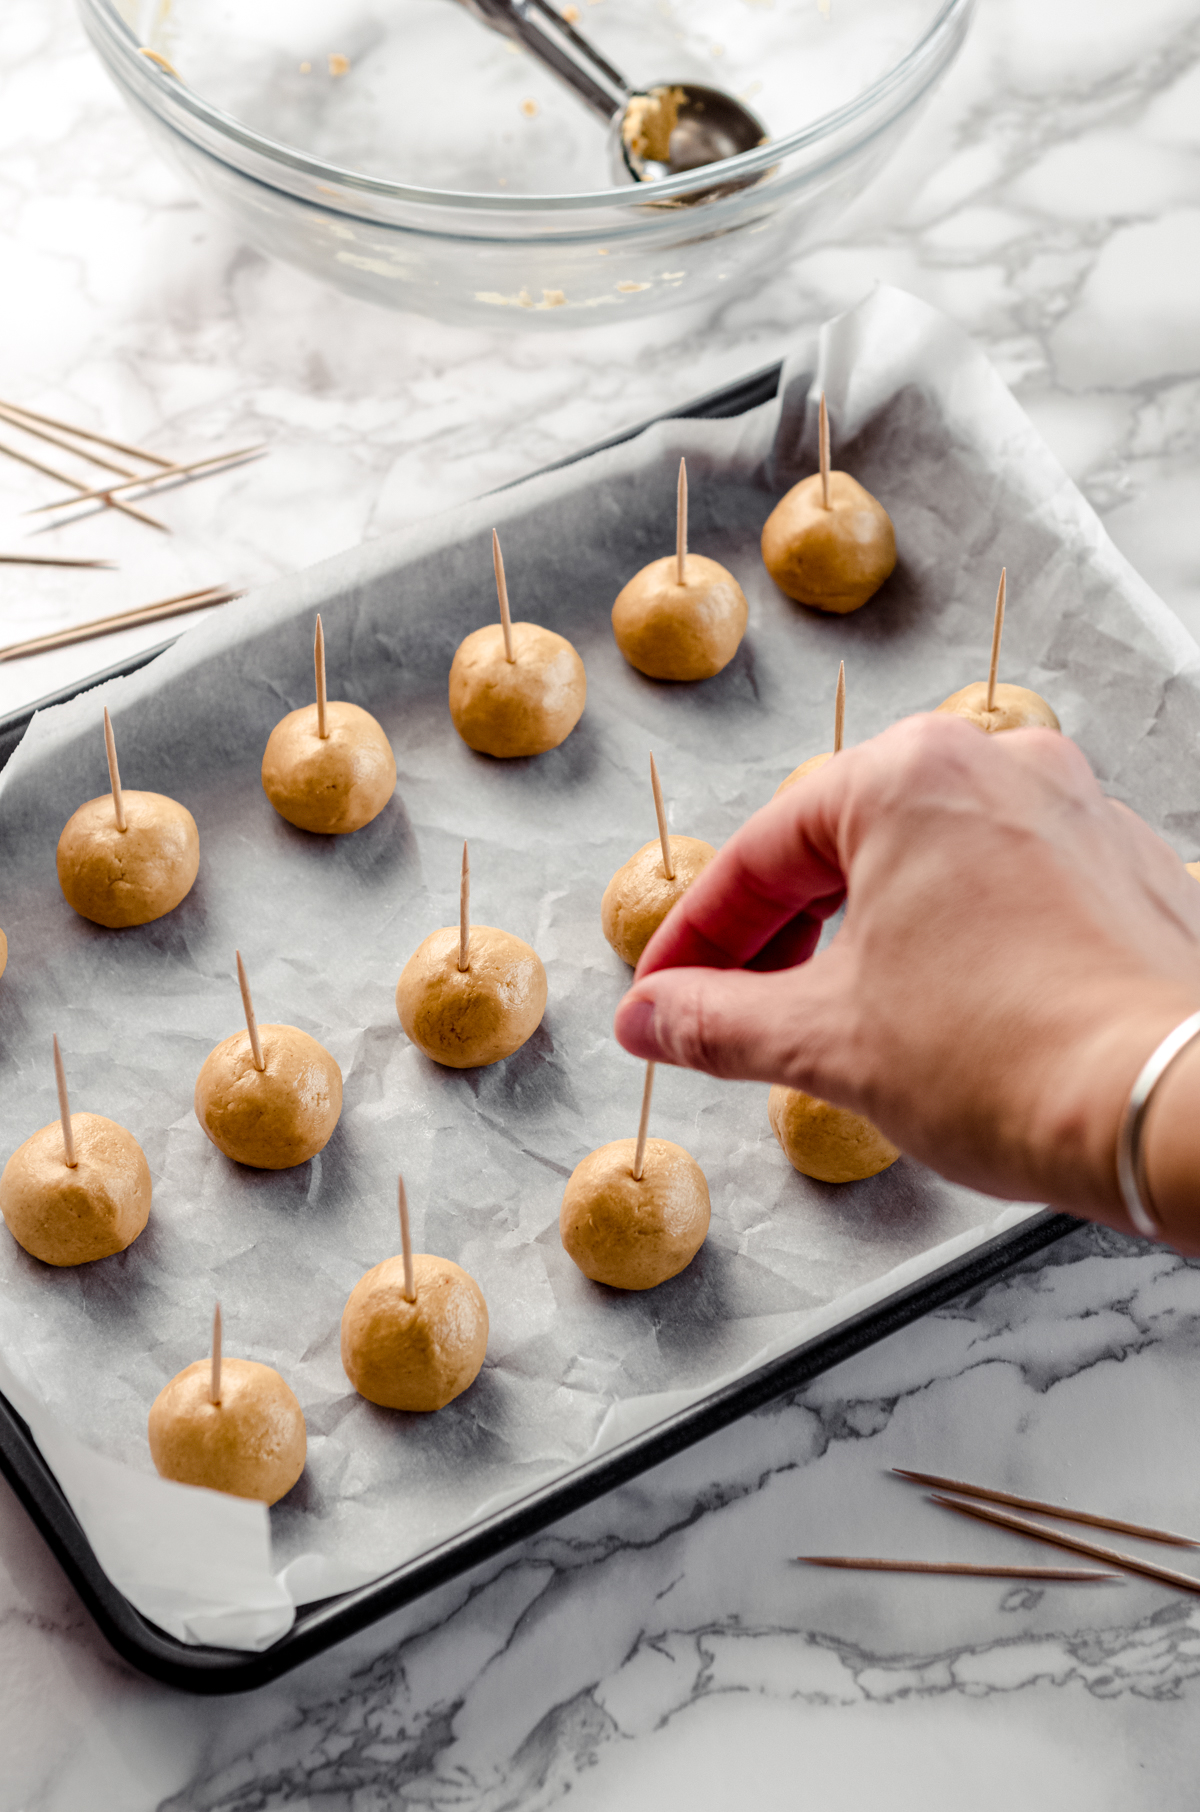 A hand pressing toothpicks into peanut butter balls to make buckeyes.